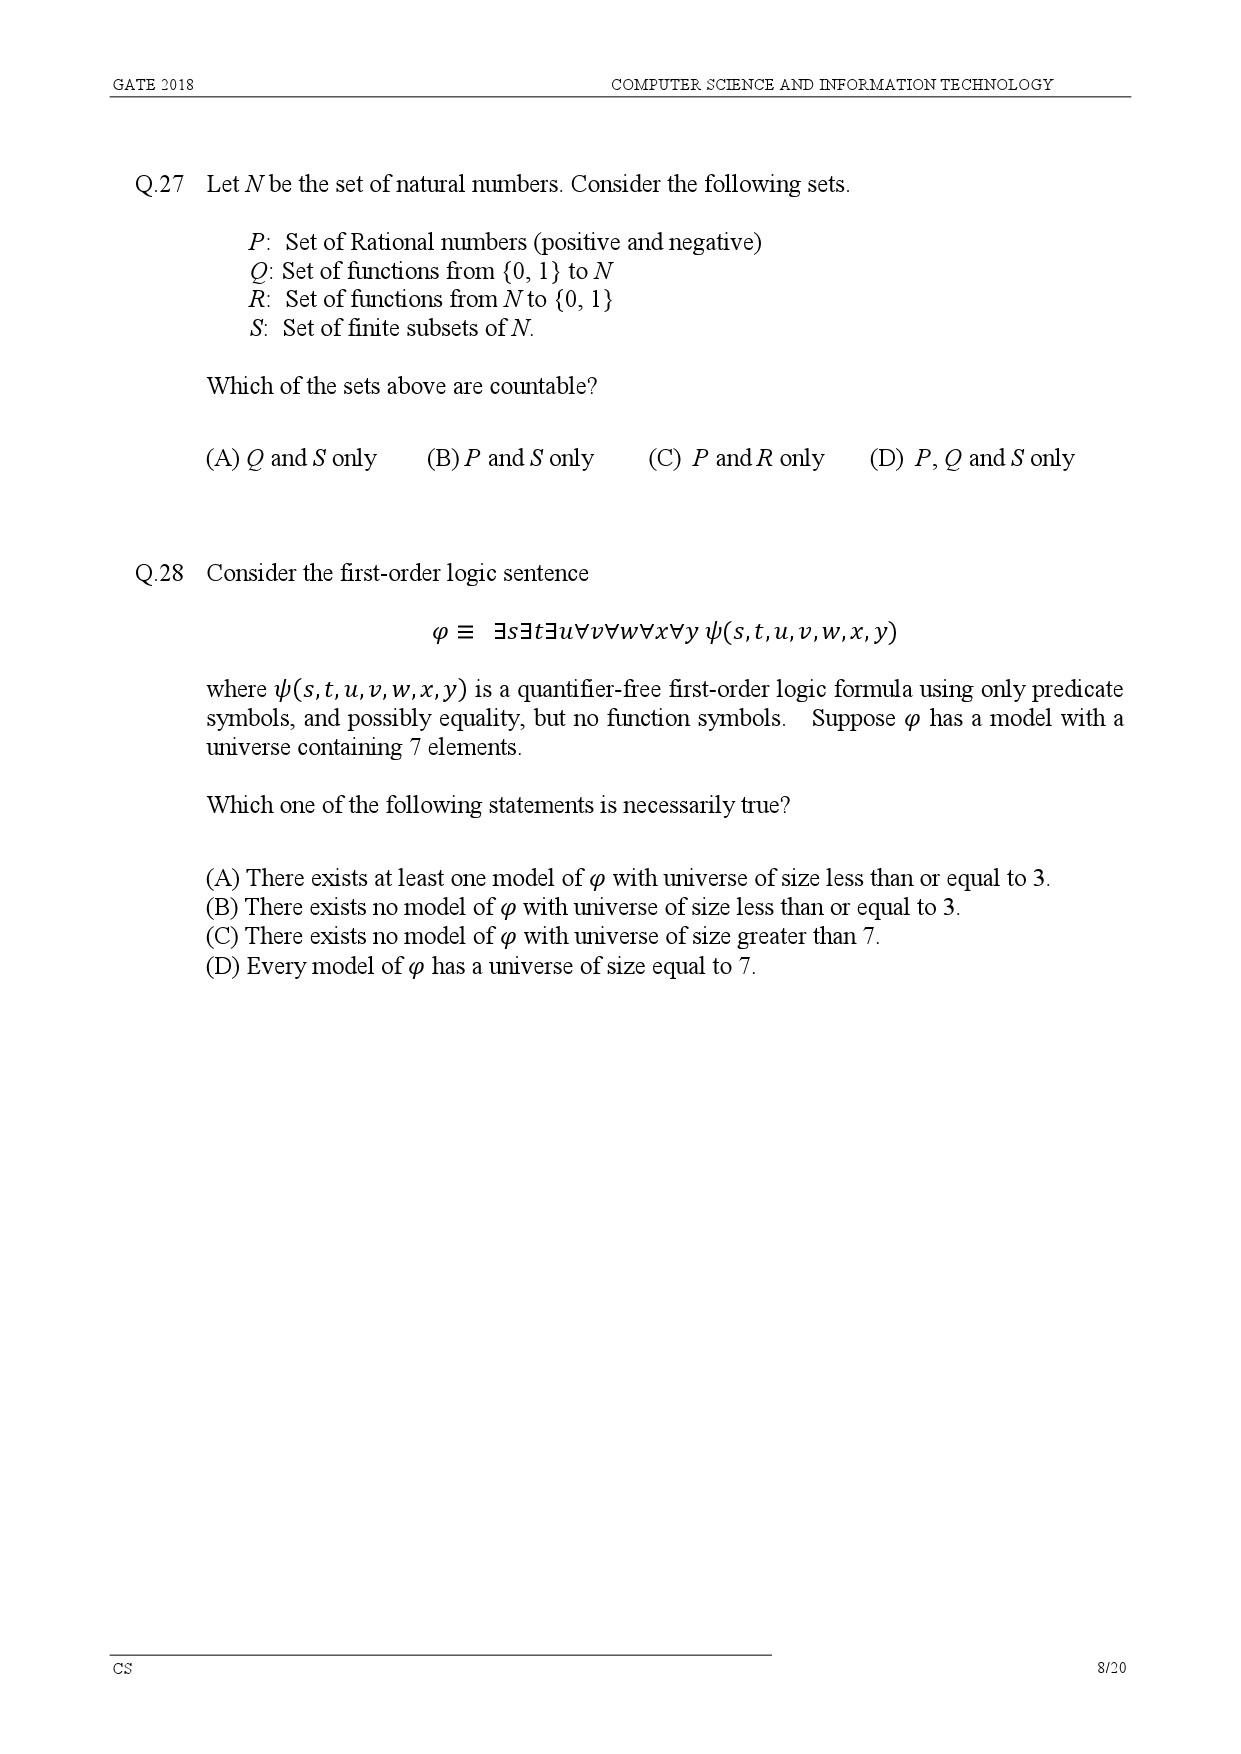 GATE Exam Question Paper 2018 Computer Science and Information Technology 11